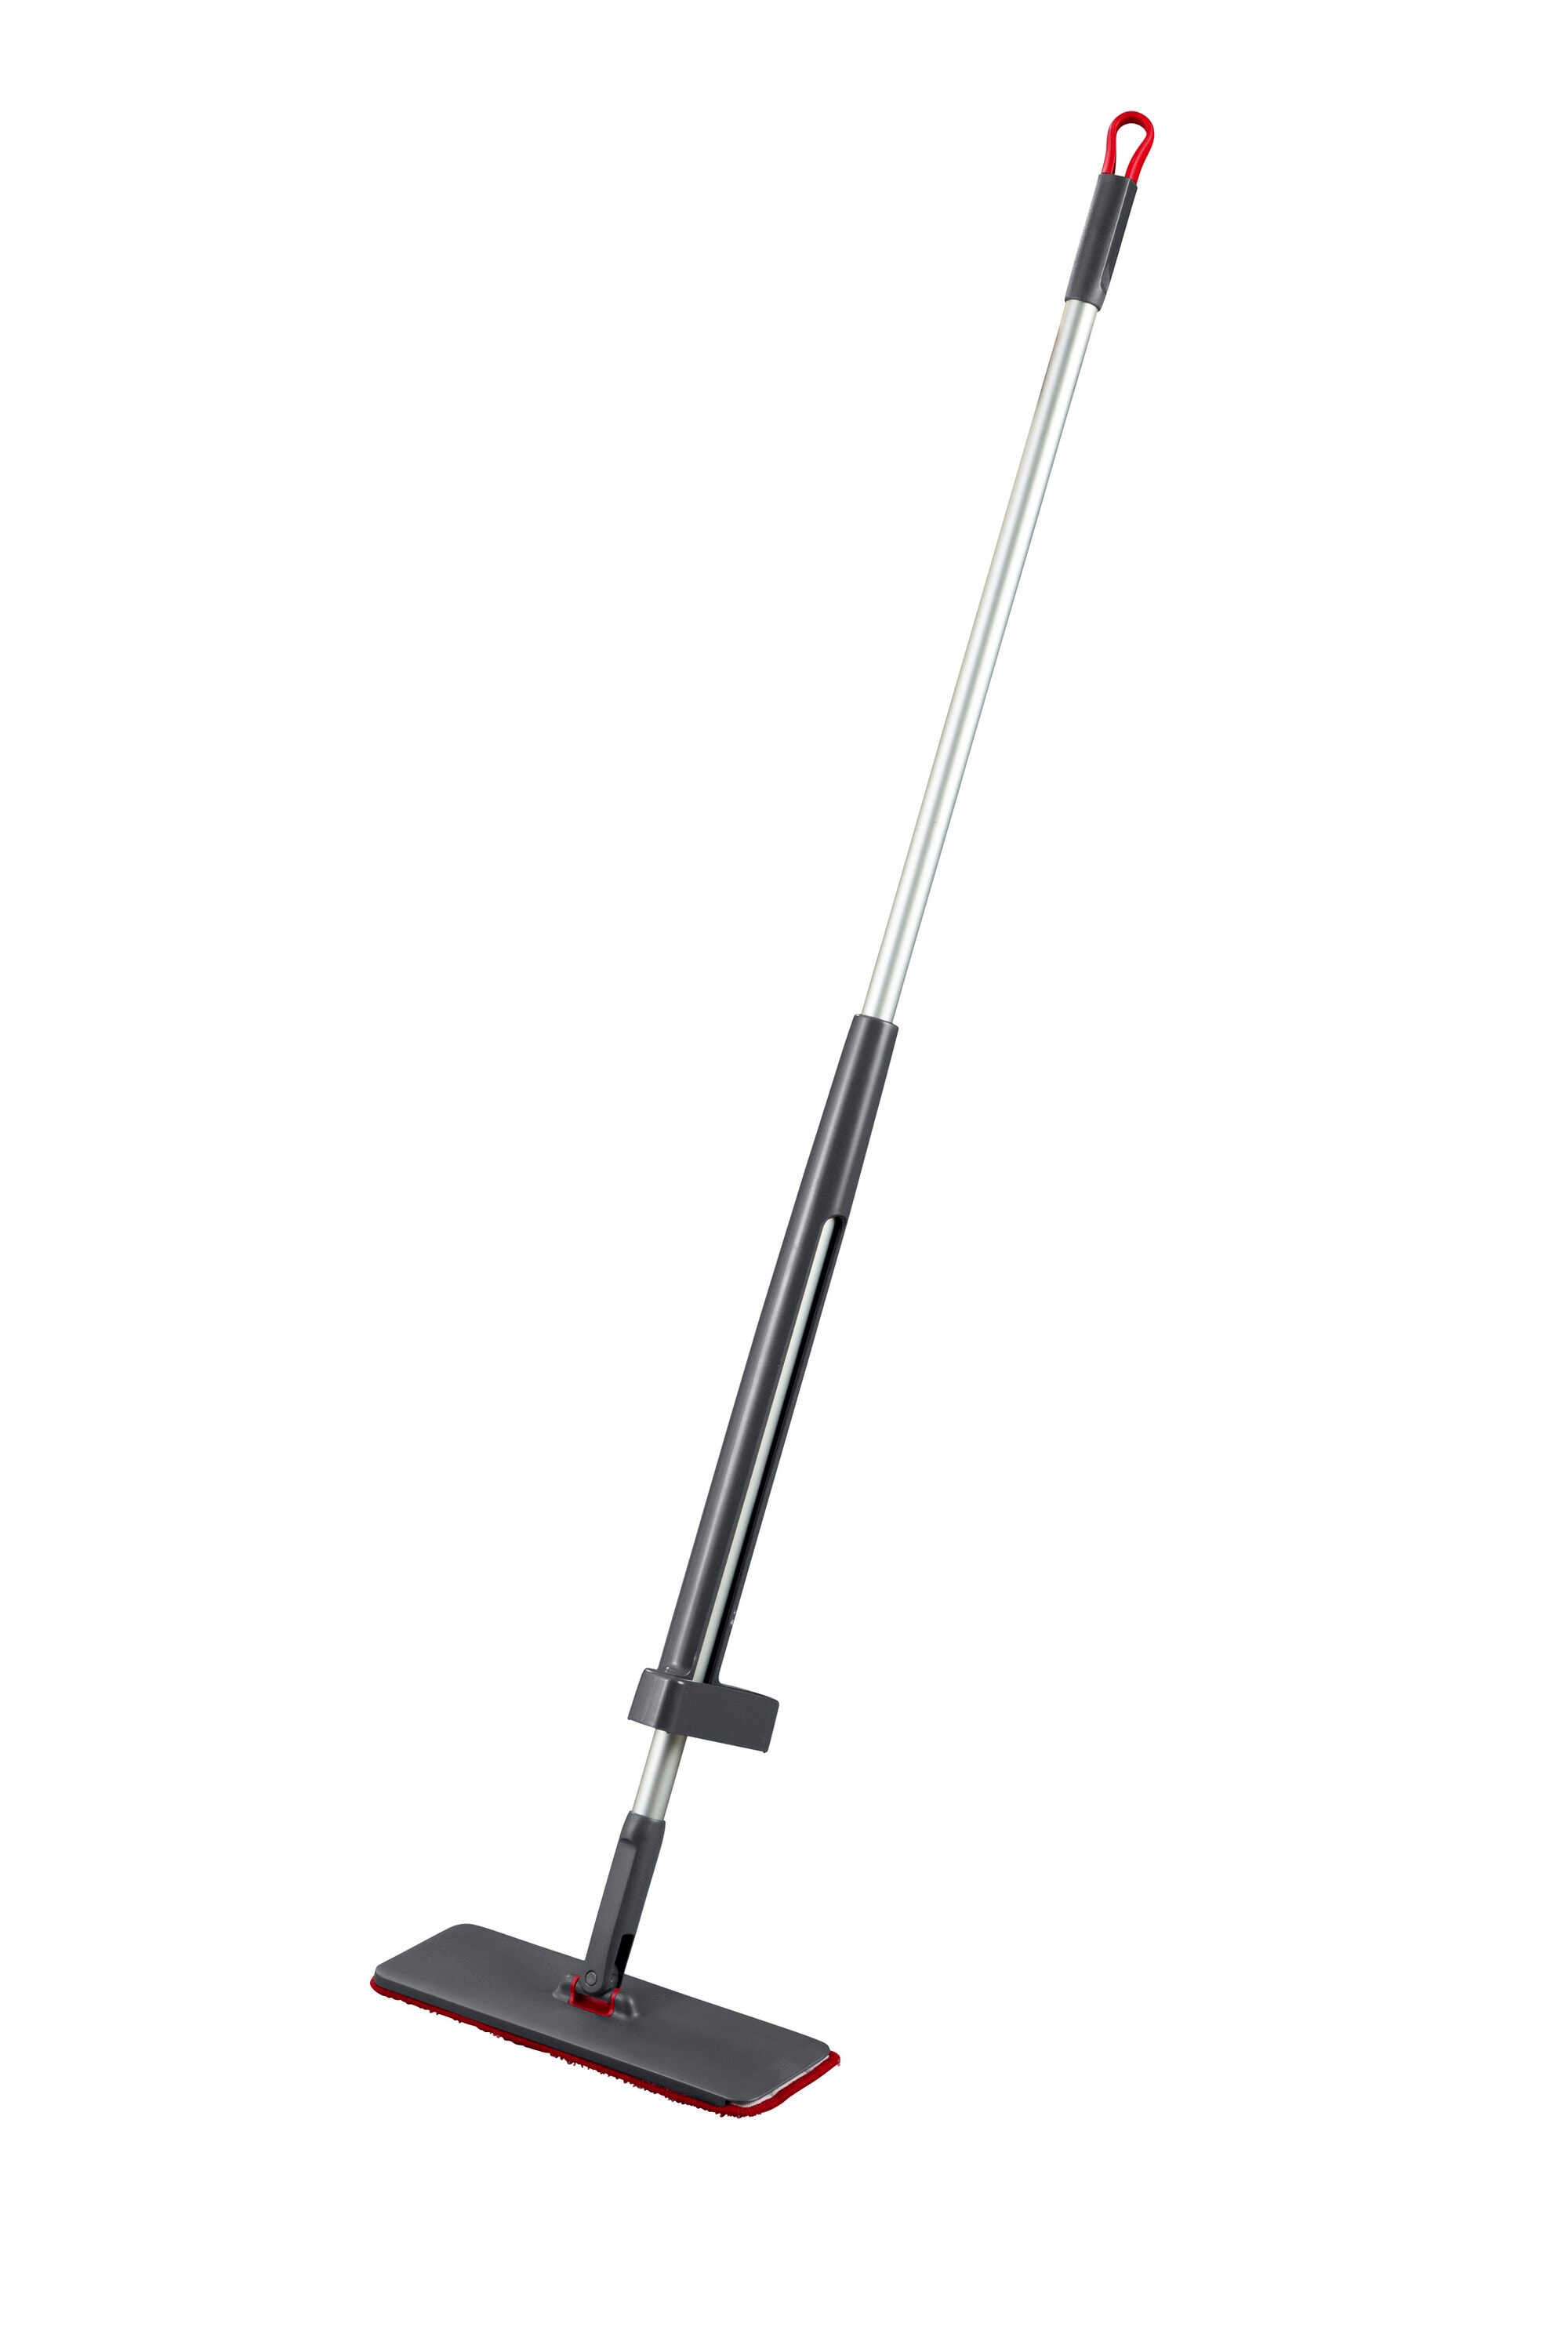 Rubbermaid Microfiber Flat Spin Mop Floor Cleaning System with